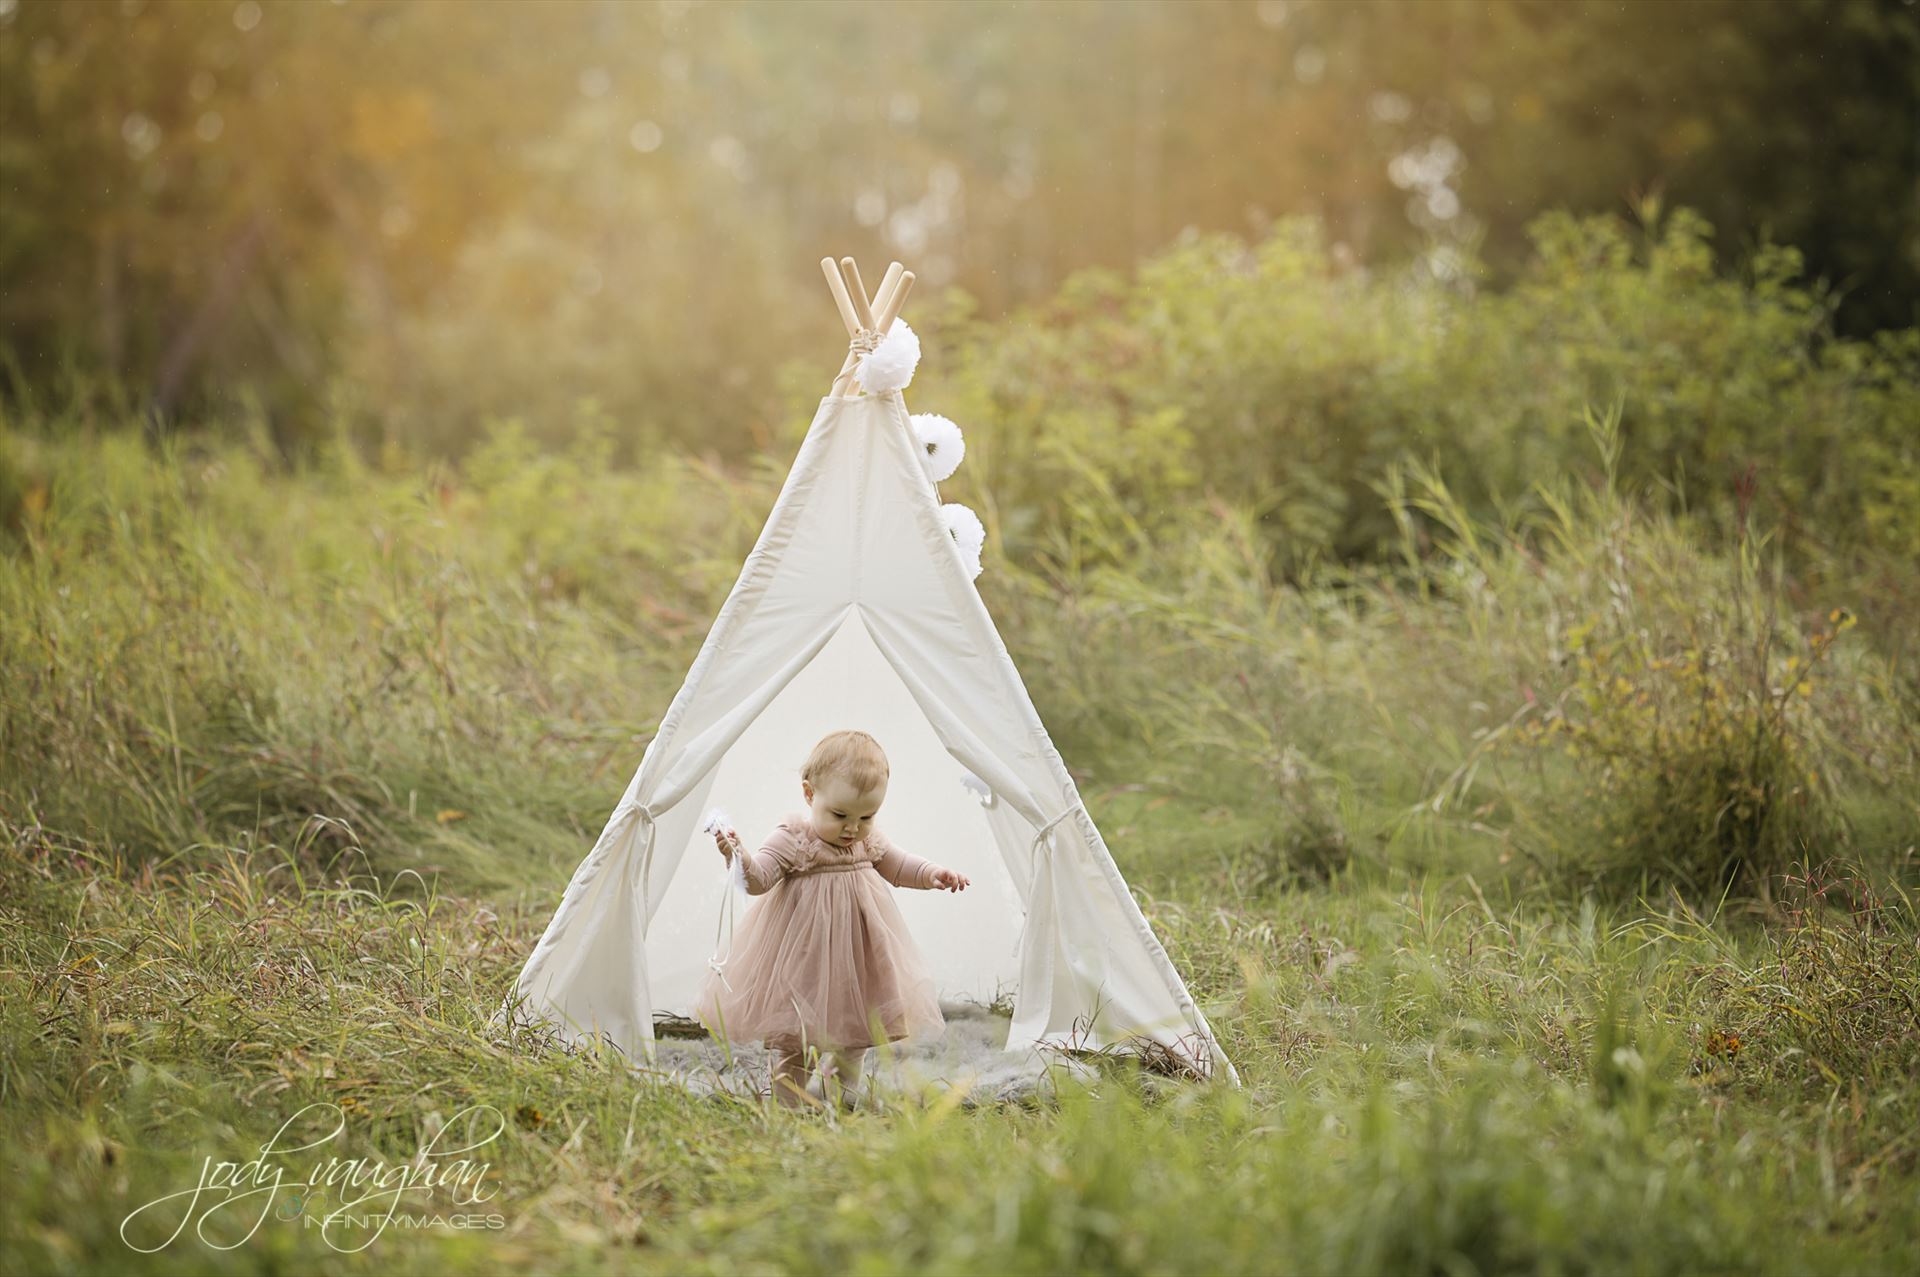 children 17  by Jody Vaughan Infinity Images